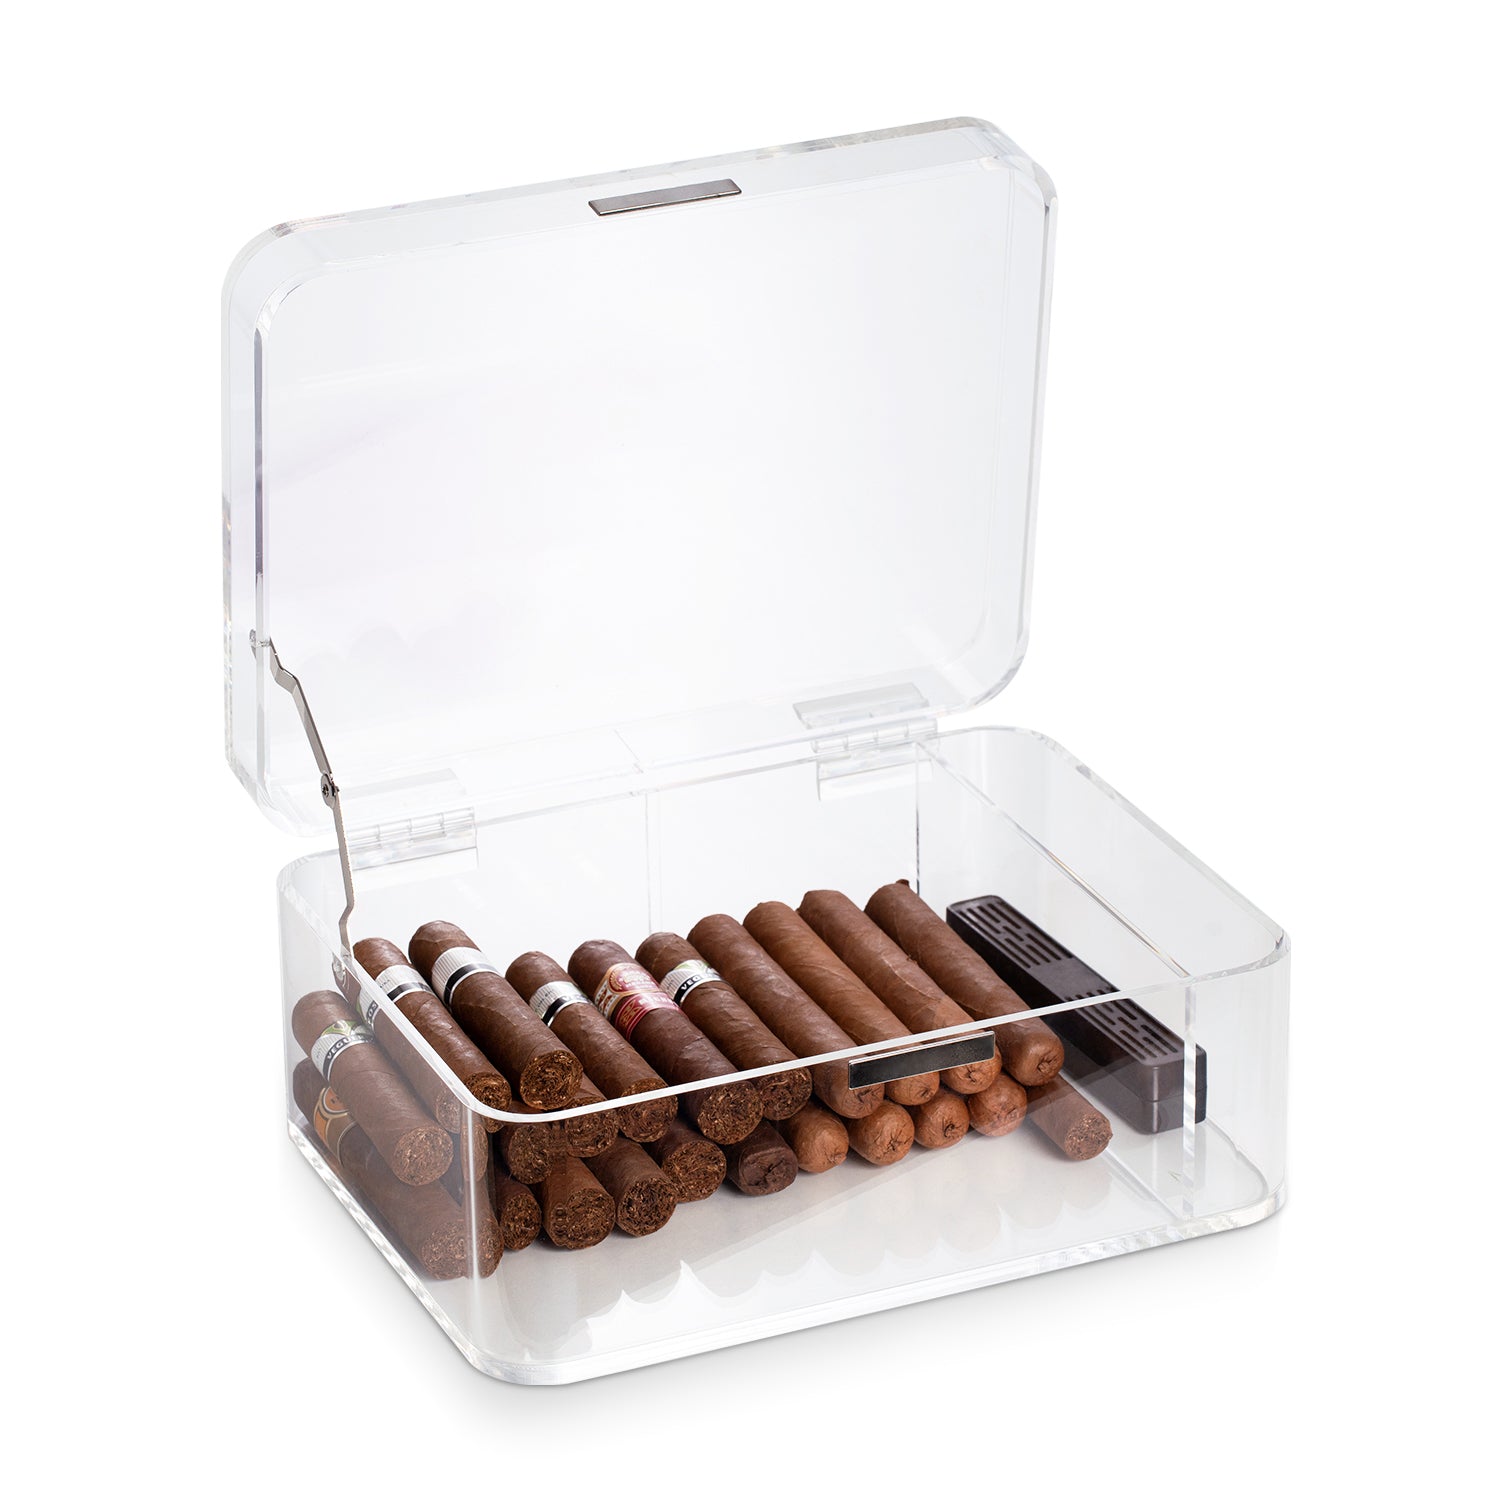 Acrylic Humidor – Vices Reserve